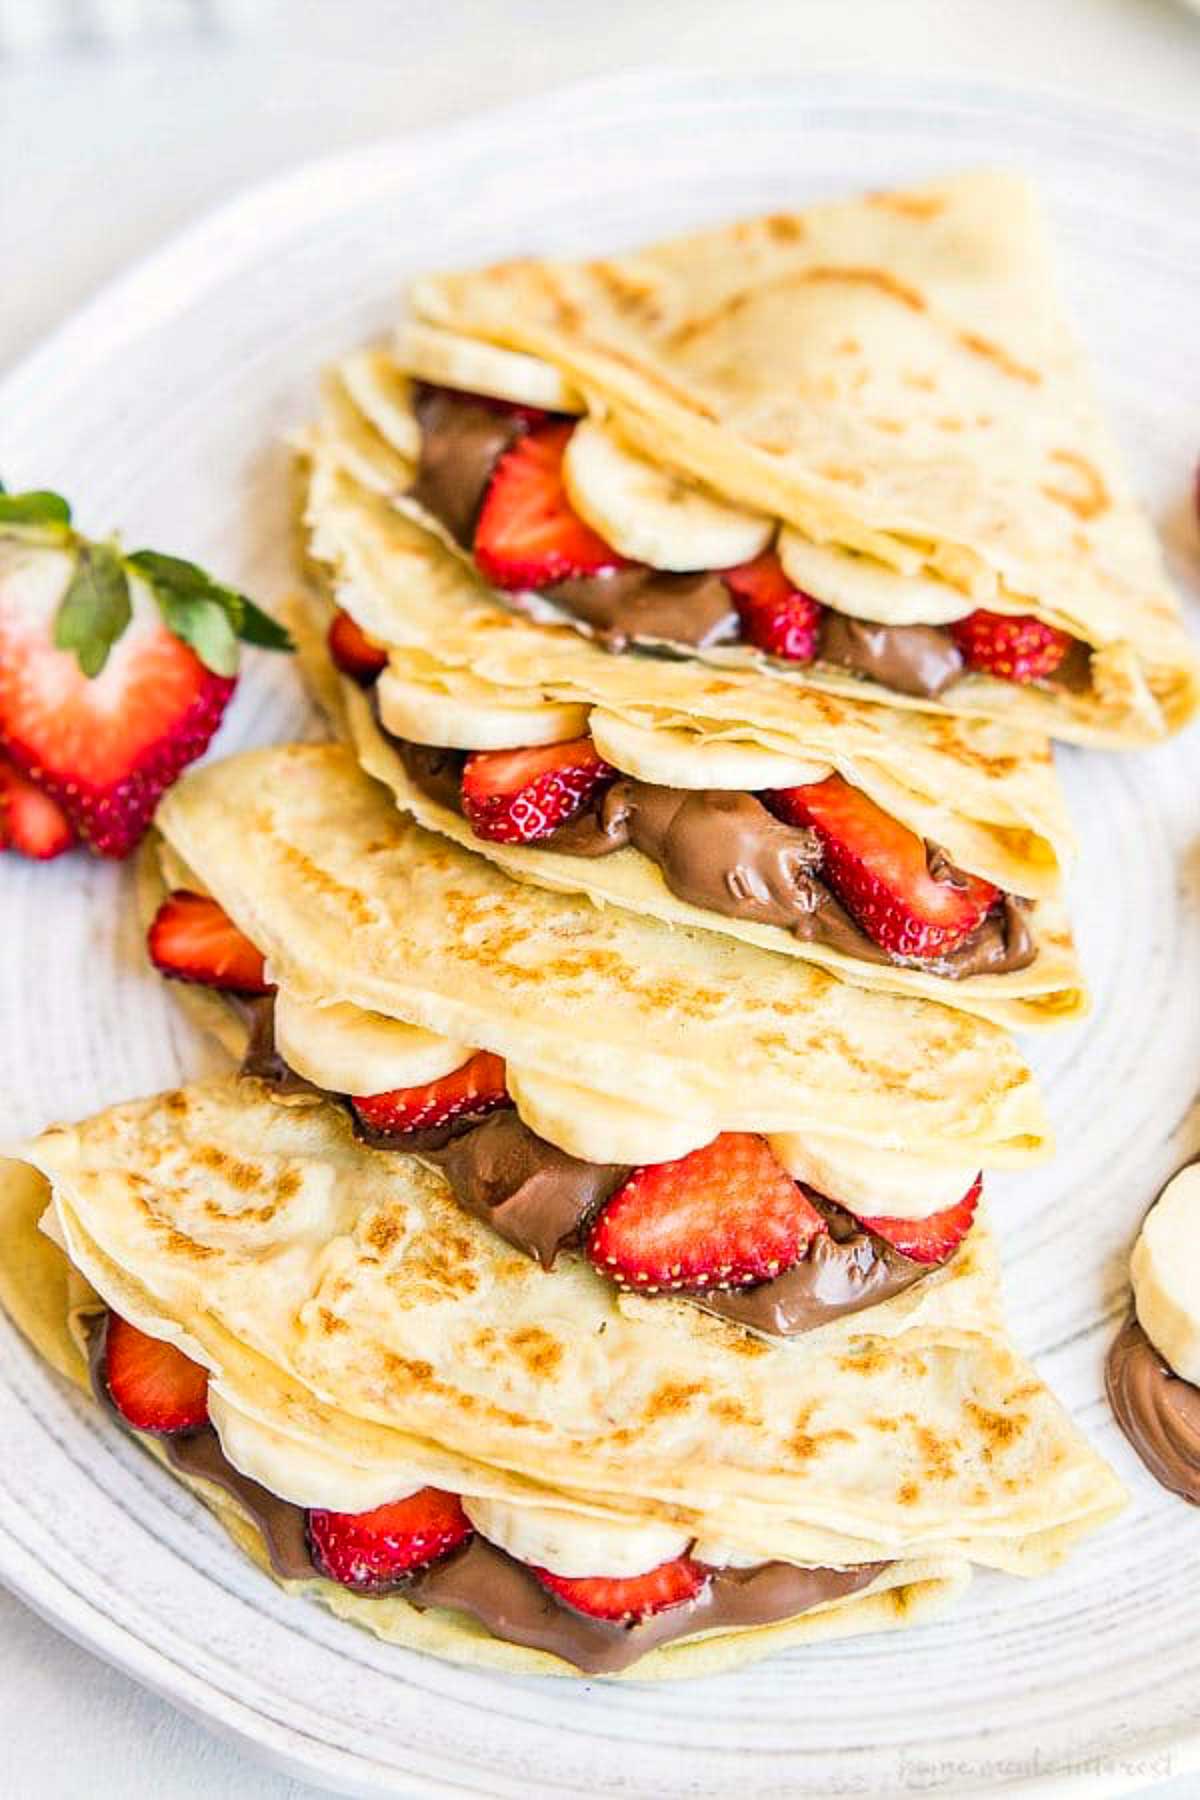 Nutella crepes in a line with bananas and strawberries